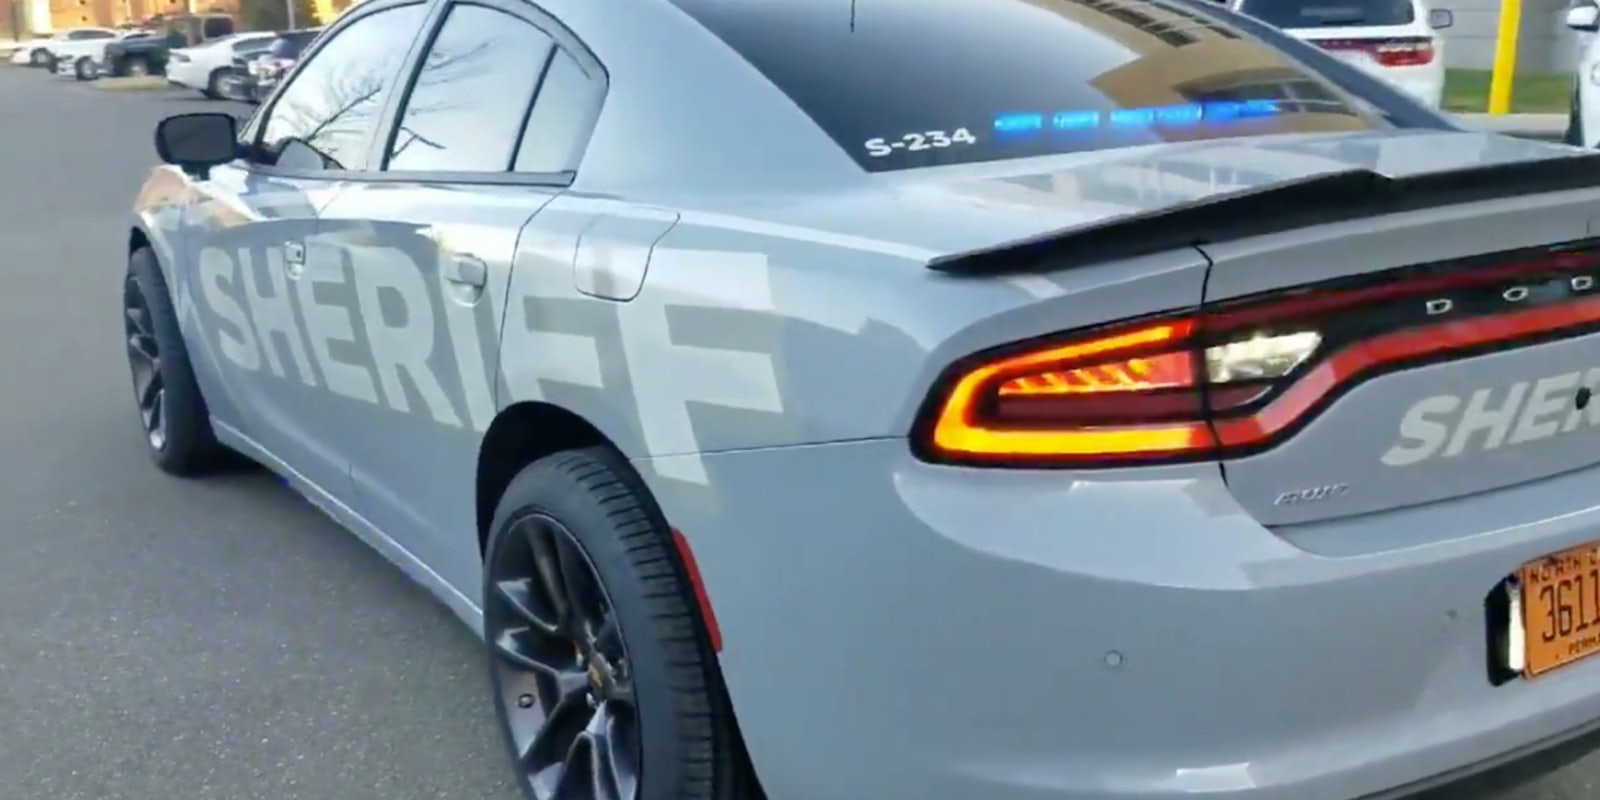 Durham Sheriff's Department so-called ghost car for traffic patrols.